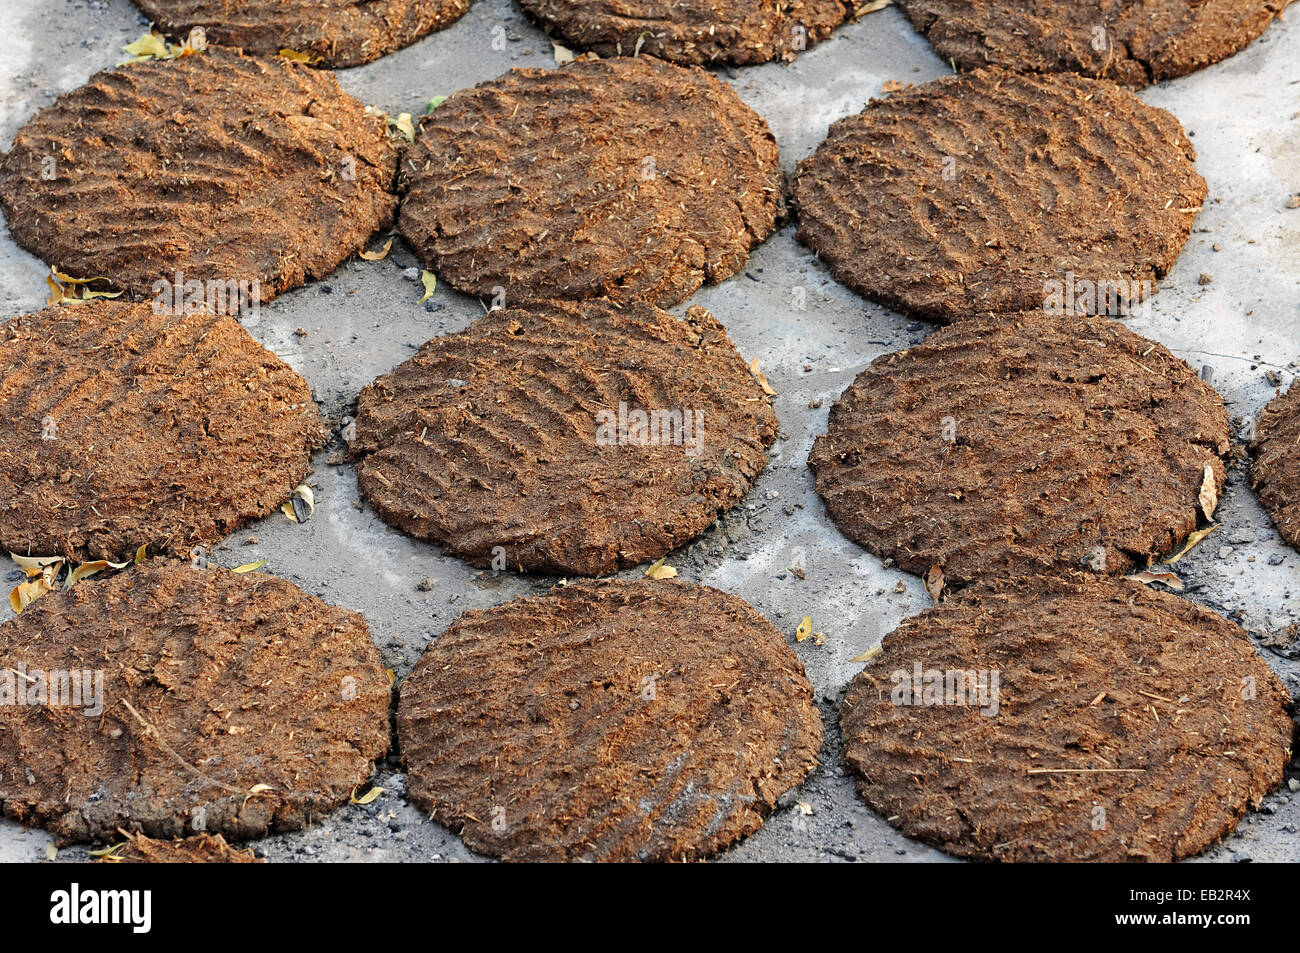 Cow dung laid out to dry for use as fuel, Bharatpur, Rajasthan, India Stock Photo